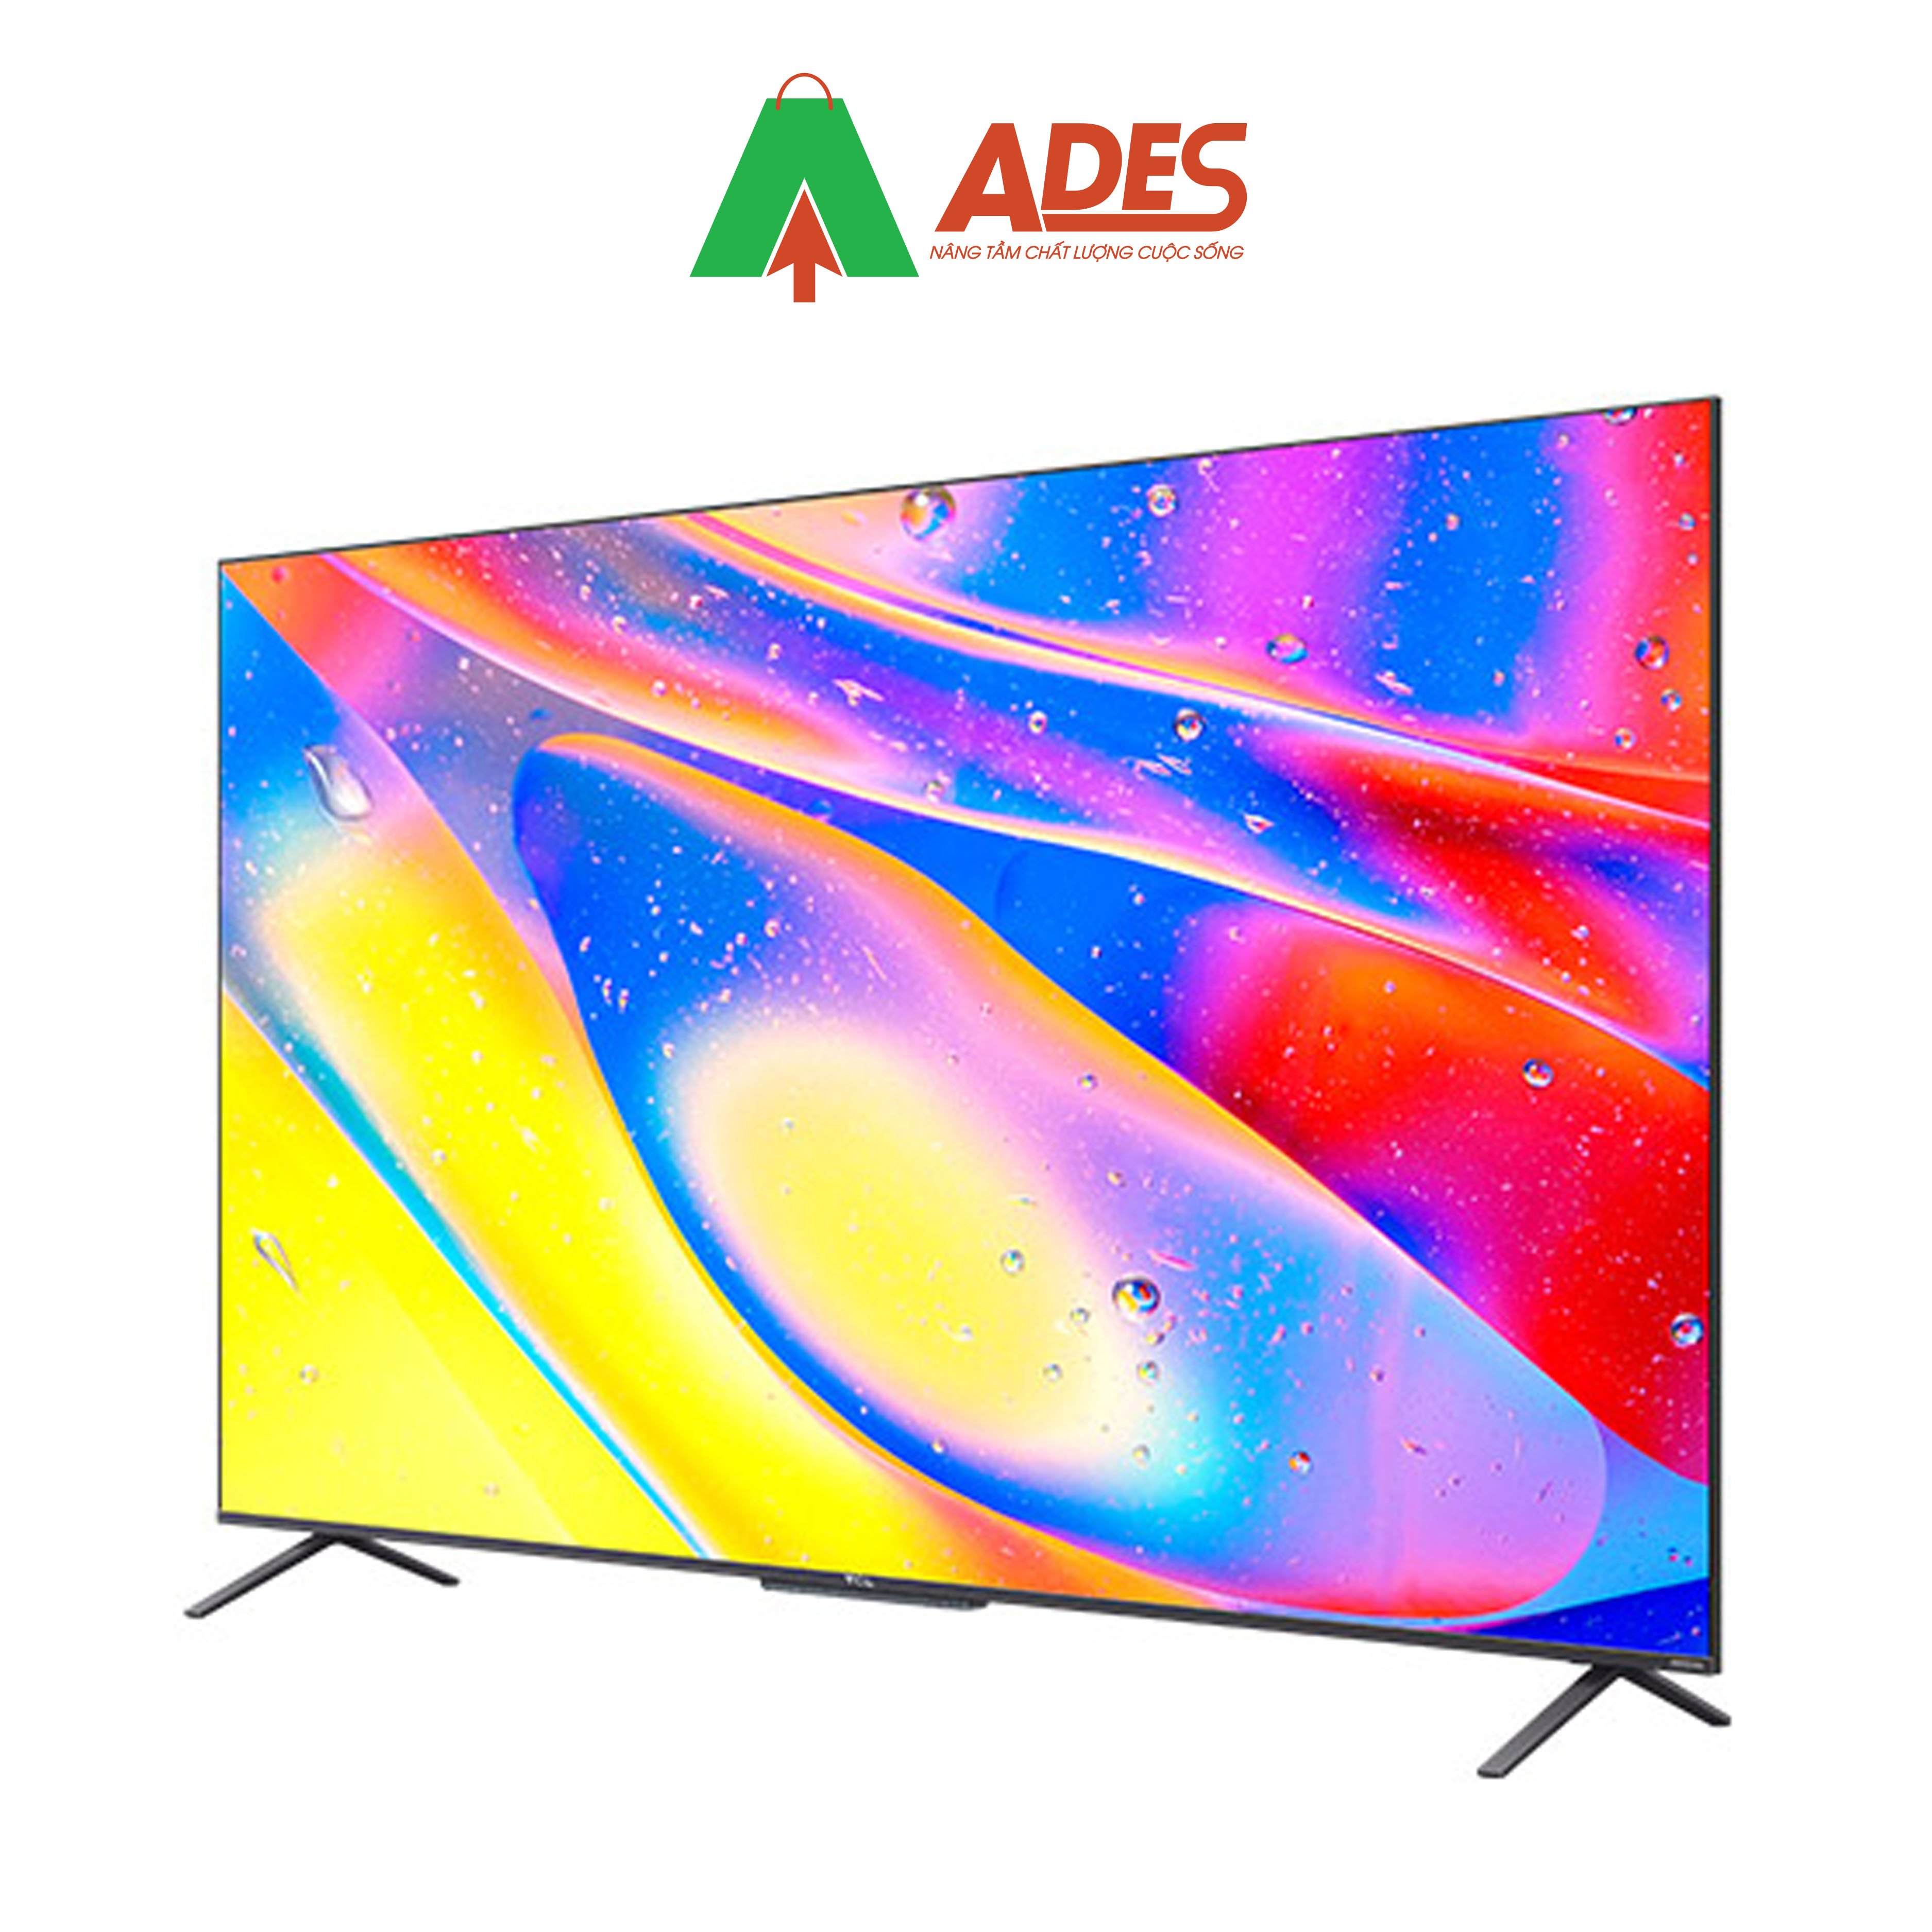 Hinh anh thuc te Android QLED TiVi TCL 4K 50inch 50C725